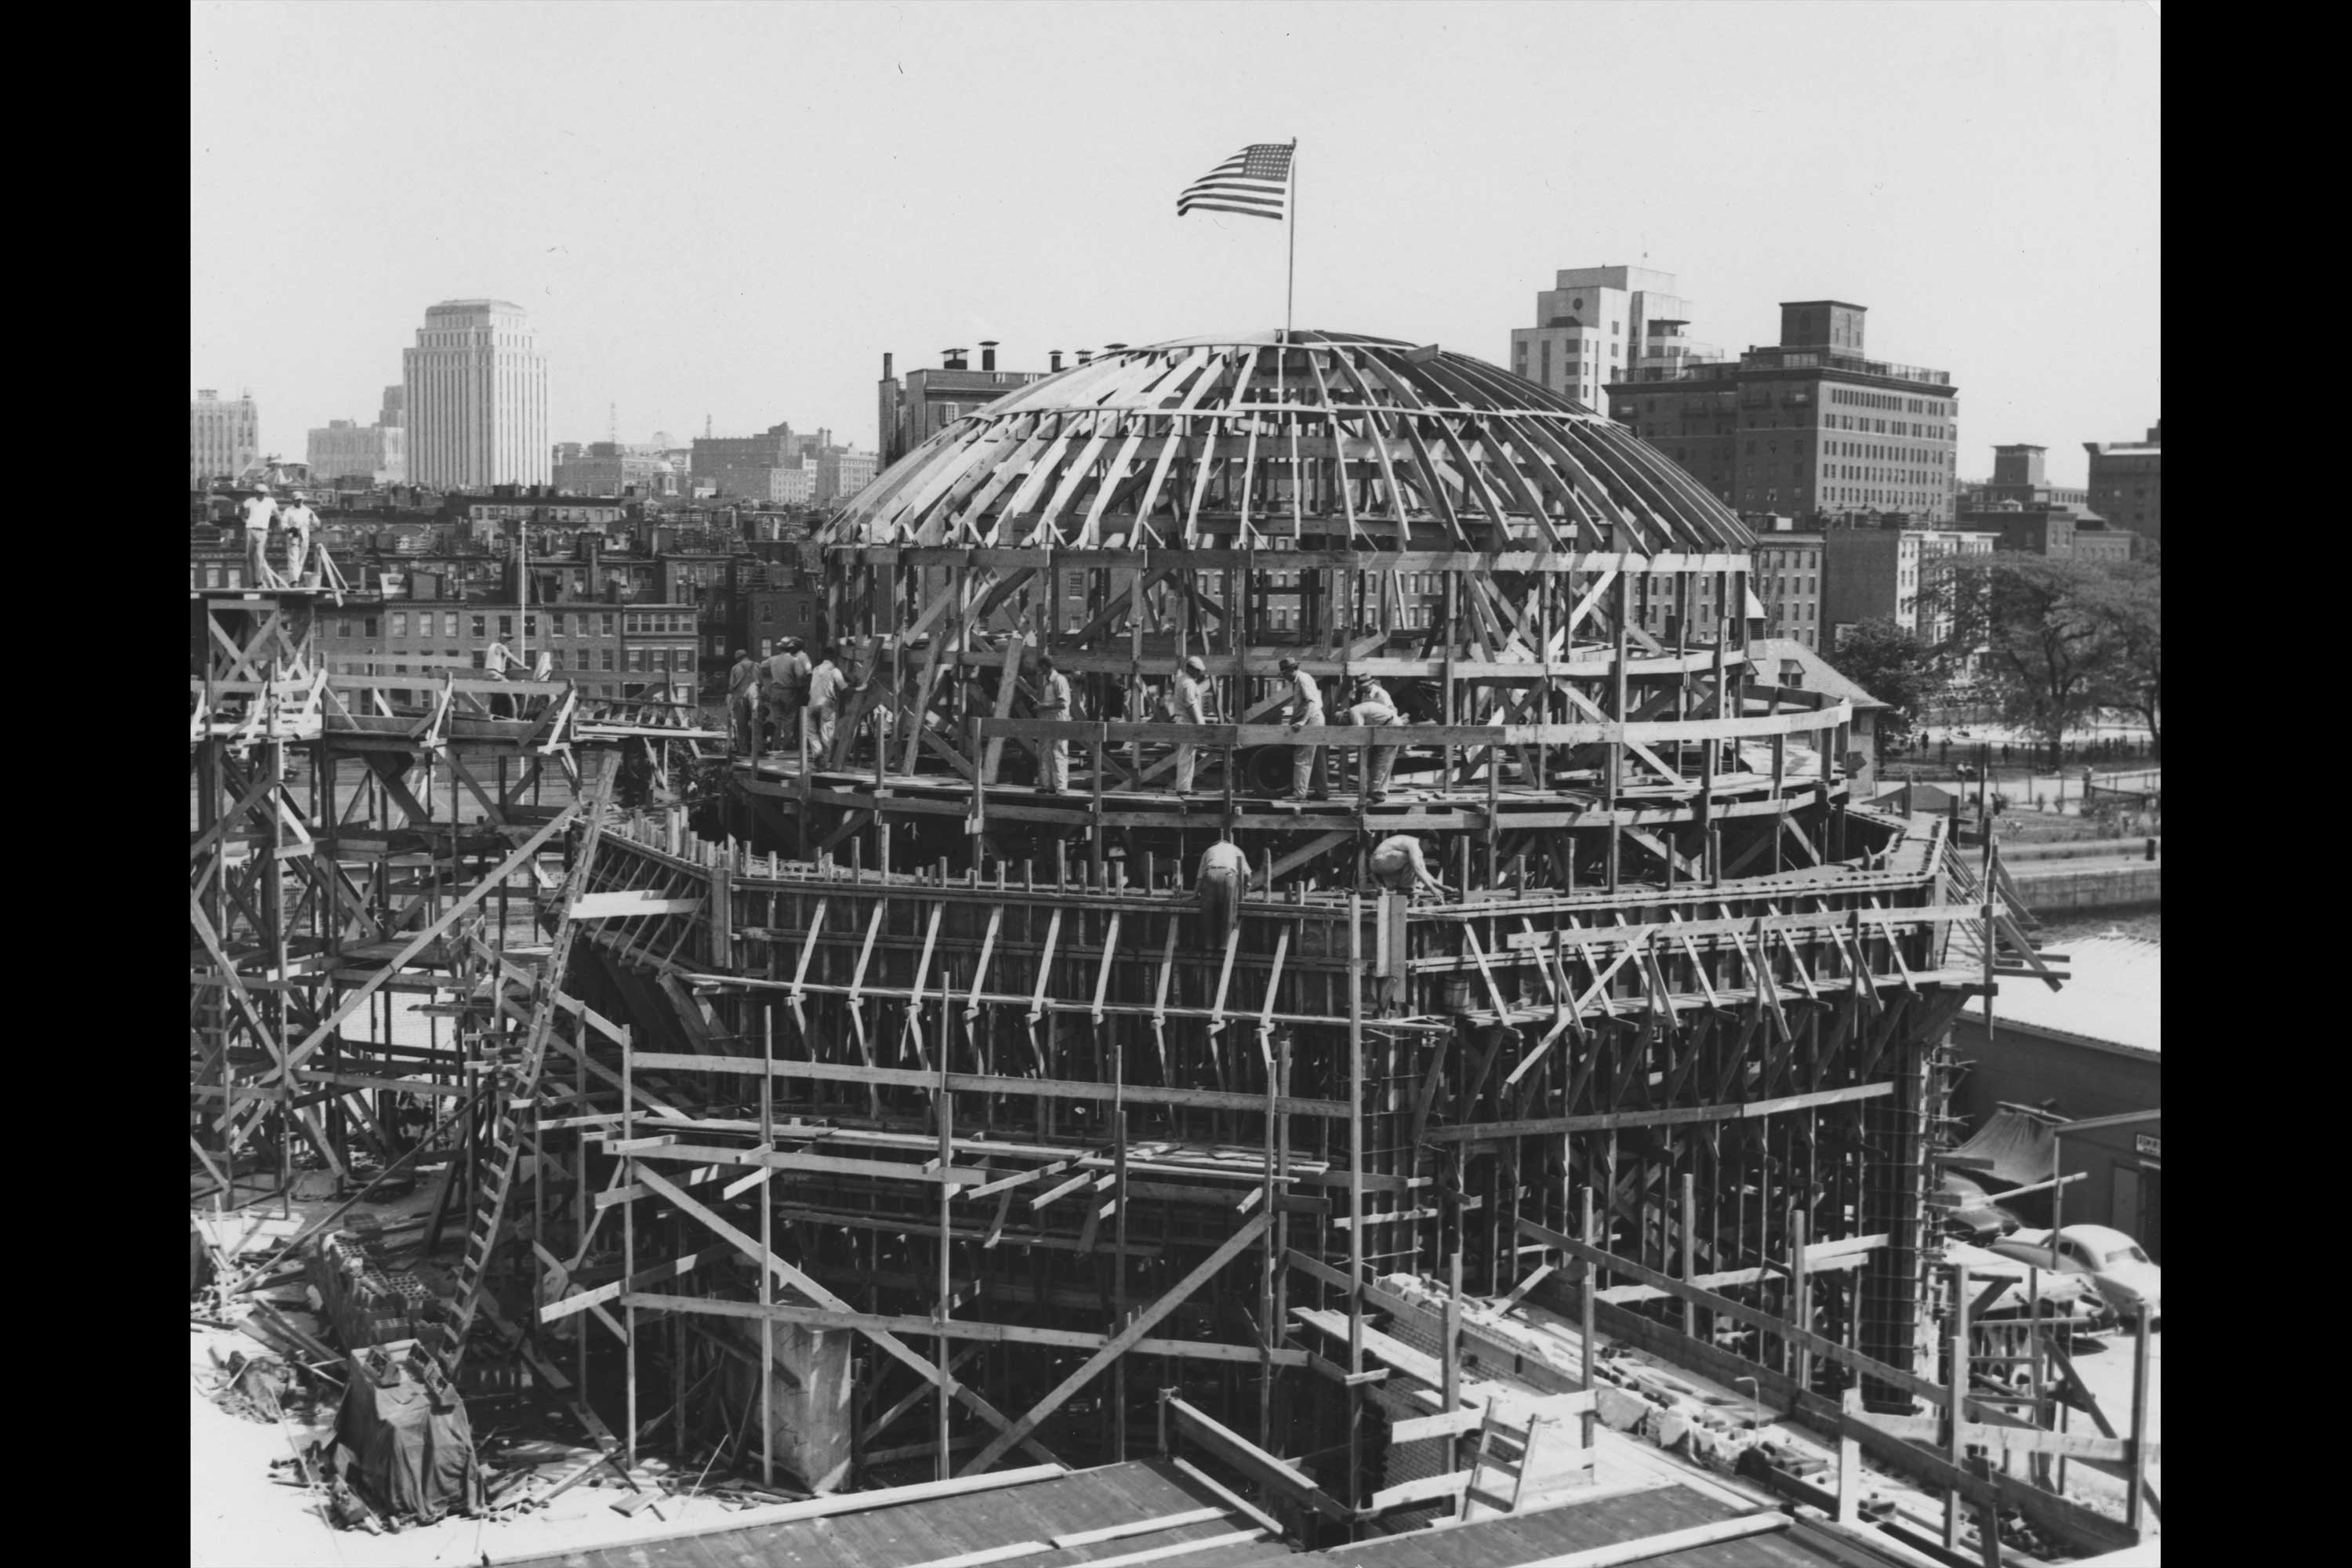 Planetarium Construction. This is a photograph of the construction of the Charles Hayden Planetarium dome.